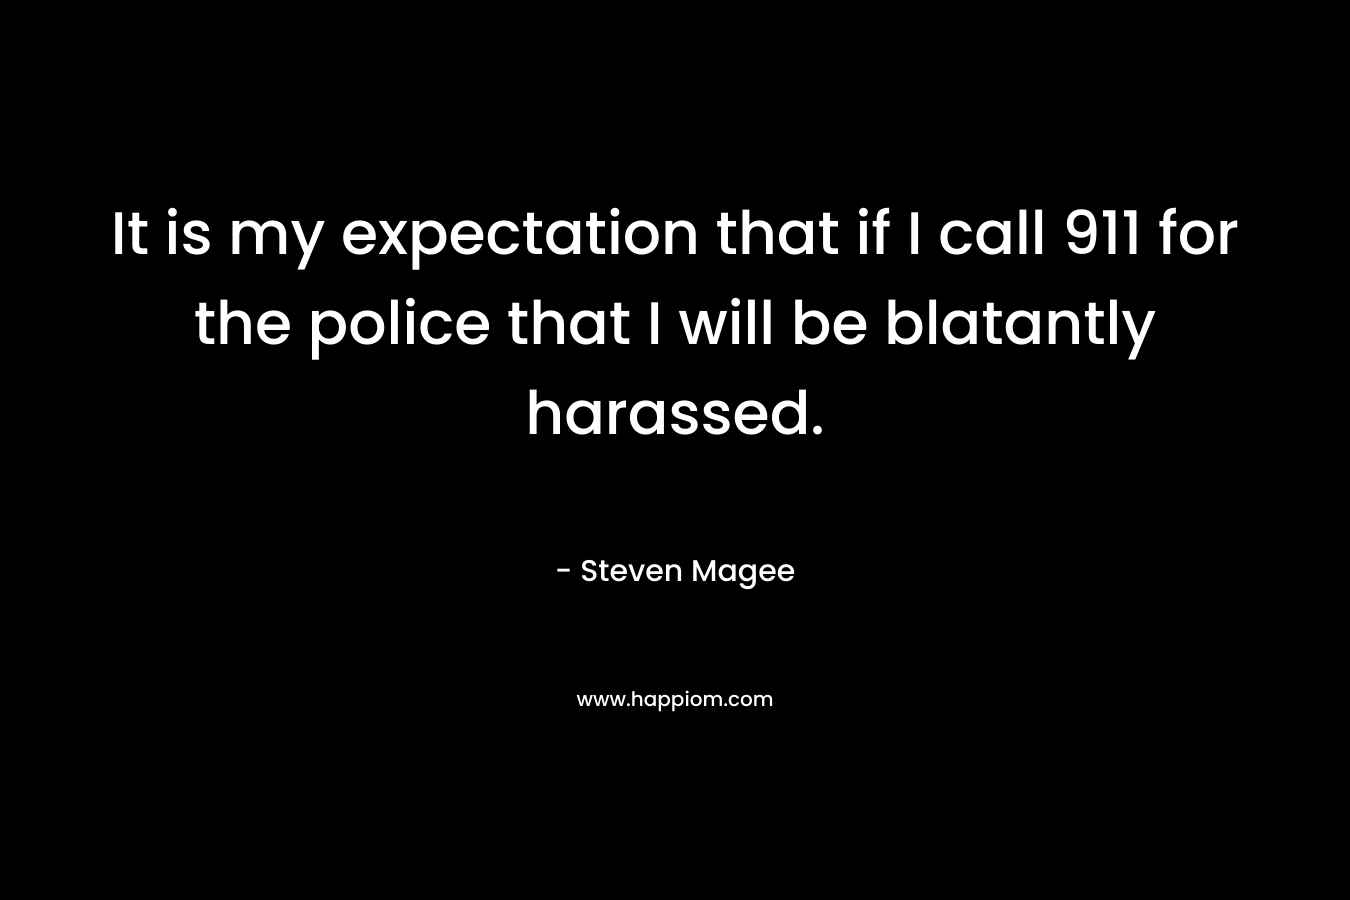 It is my expectation that if I call 911 for the police that I will be blatantly harassed.